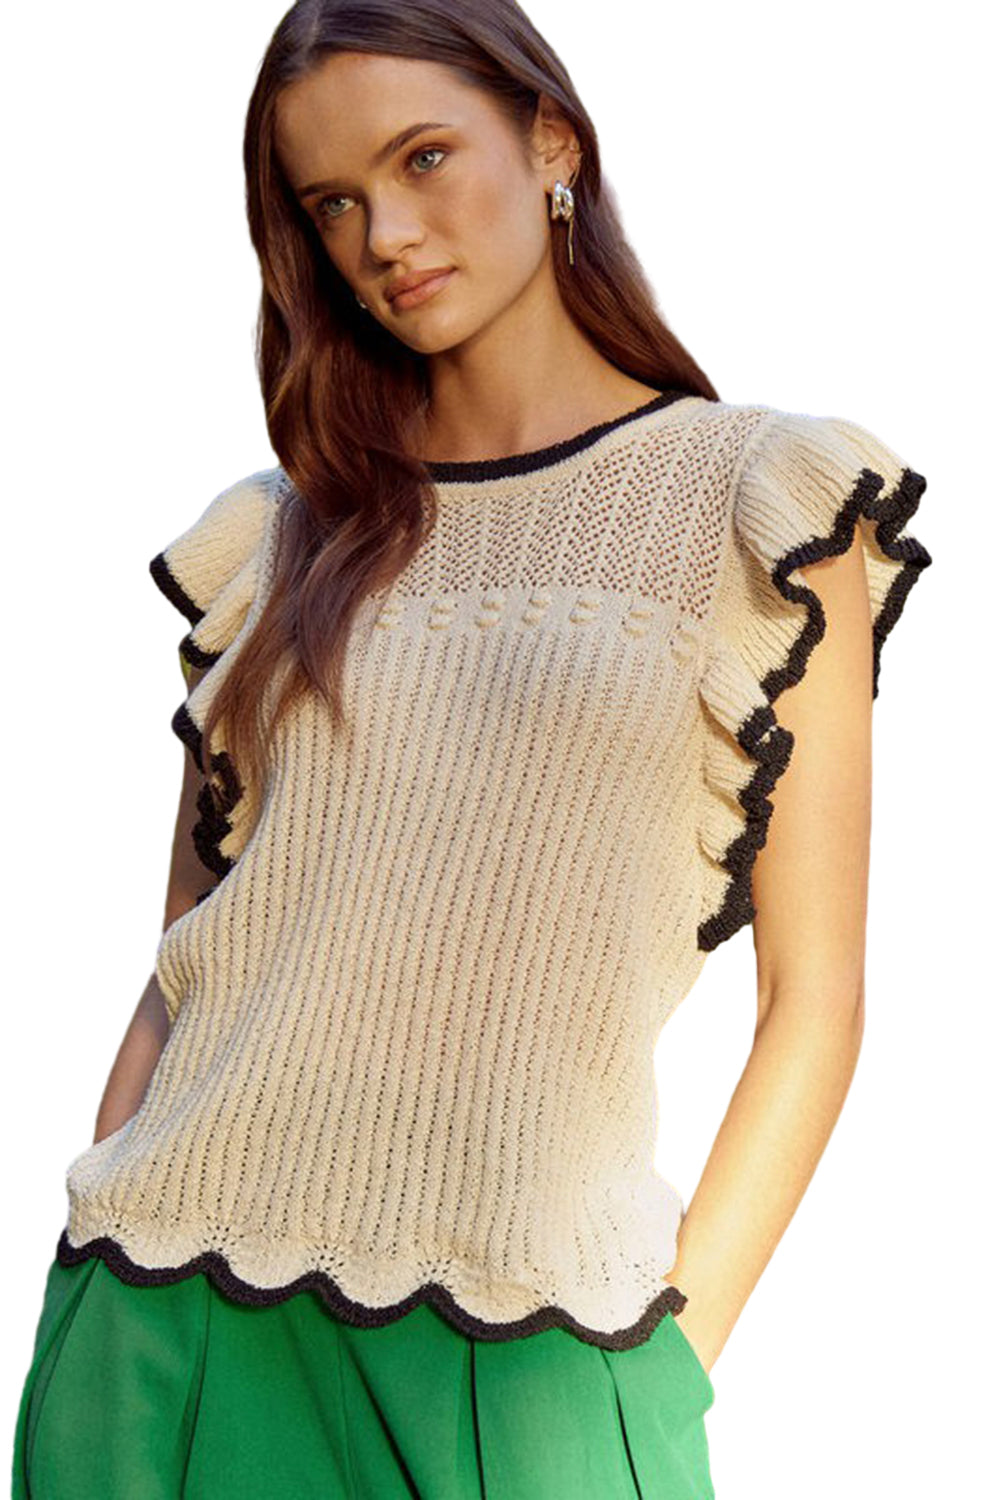 White Contrast Trim Ruffle Hollow Knit Tee